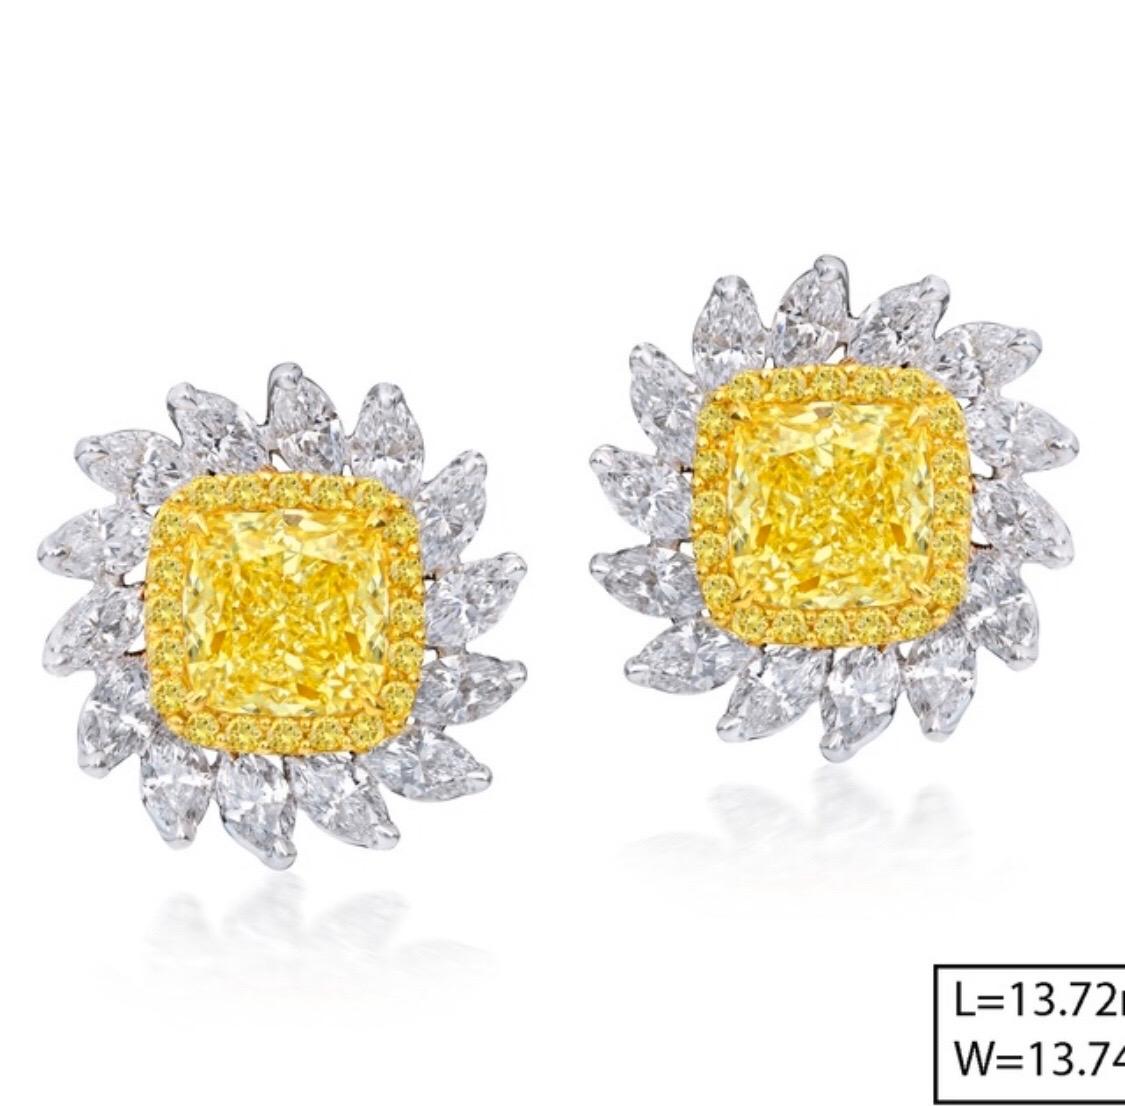 Showcasing 
2 cushion yellow diamonds=2.02ct
28 marquise=1.46ct
40 rounds=.18ct
. Hand made in the Emilio Jewelry Atelier, whom specializes in rare collectible pieces in the Natural ultra rare fancy colored Diamond sector.
Please inquire for more